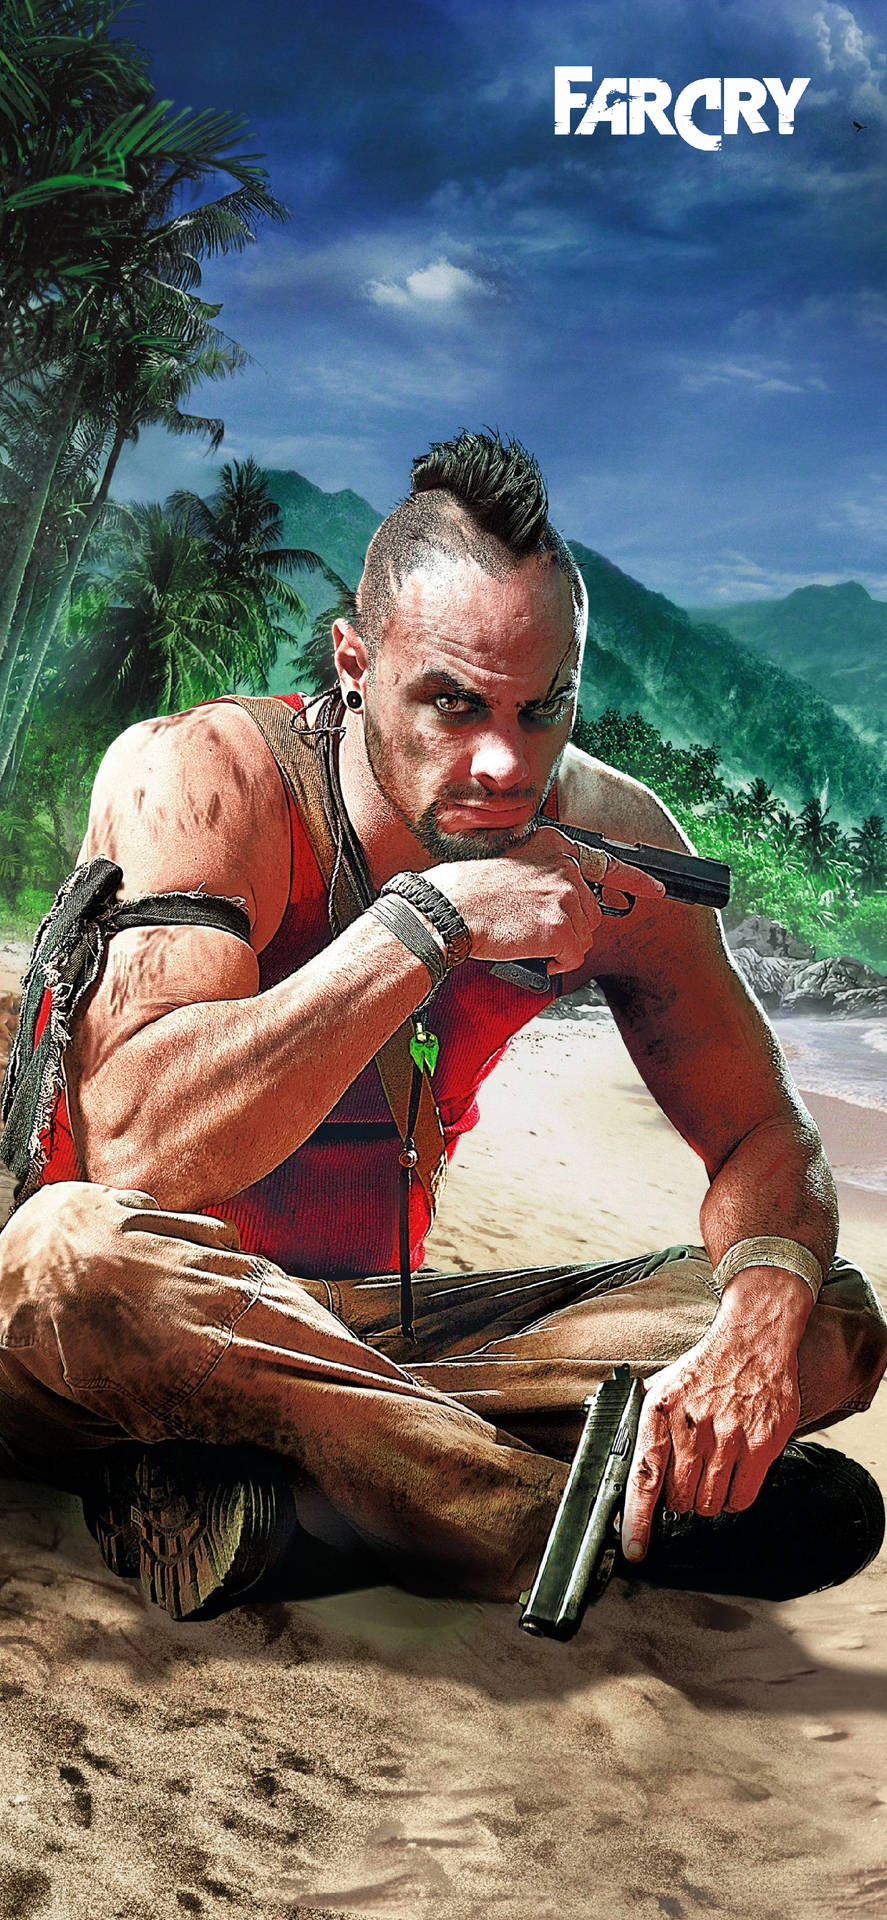 Vaas Montenegro Far Cry Iphone Background